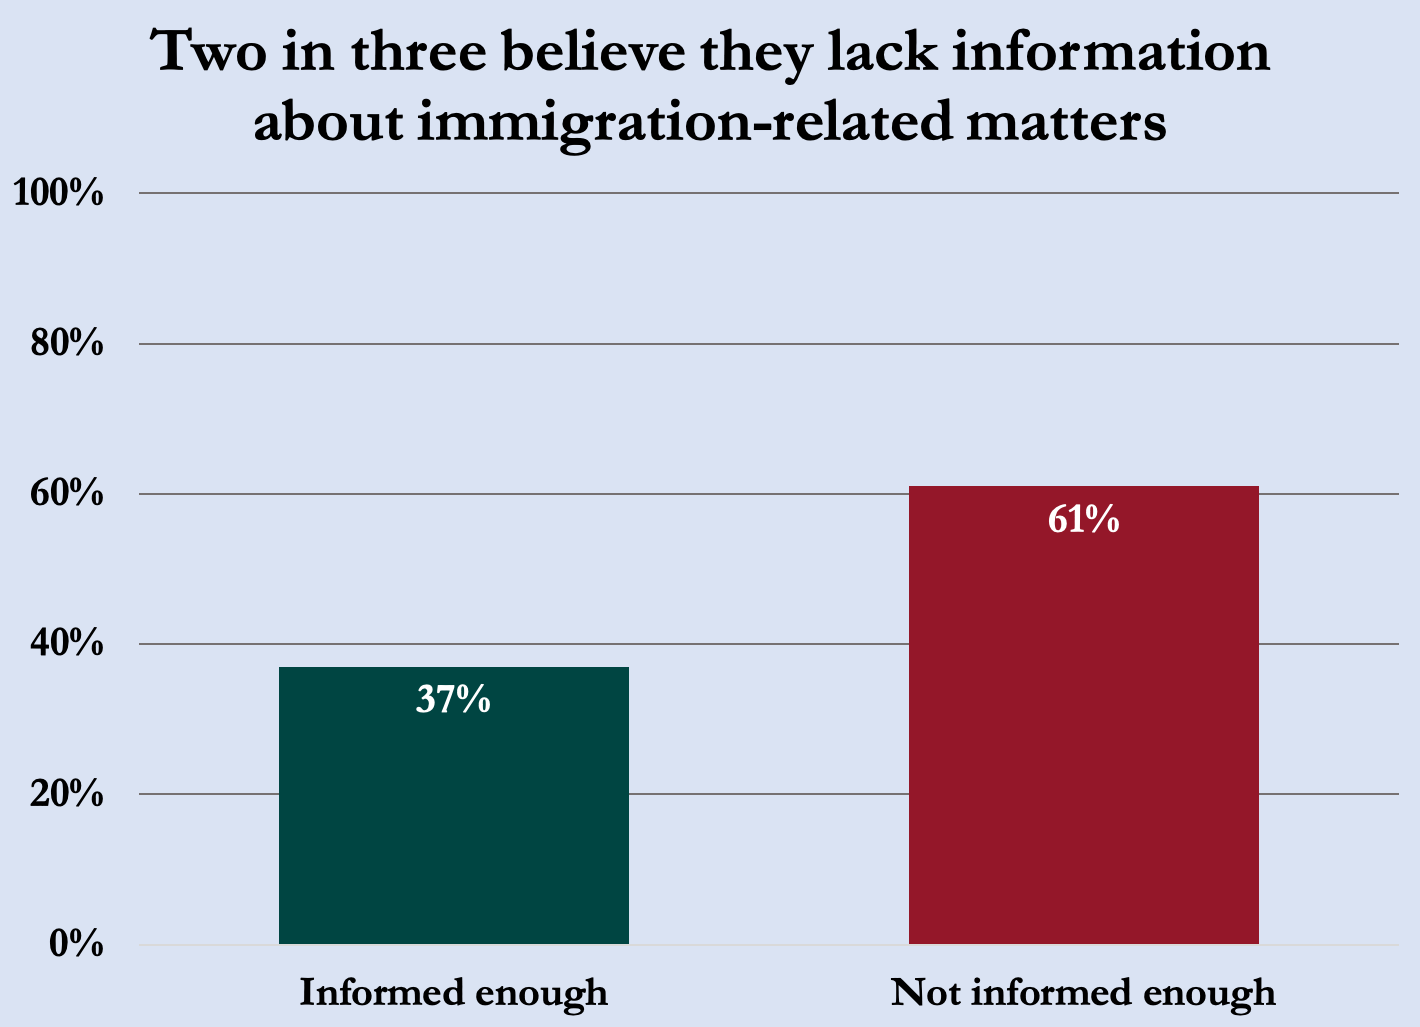 Awareness of issues surrounding immigration and immigrant integration